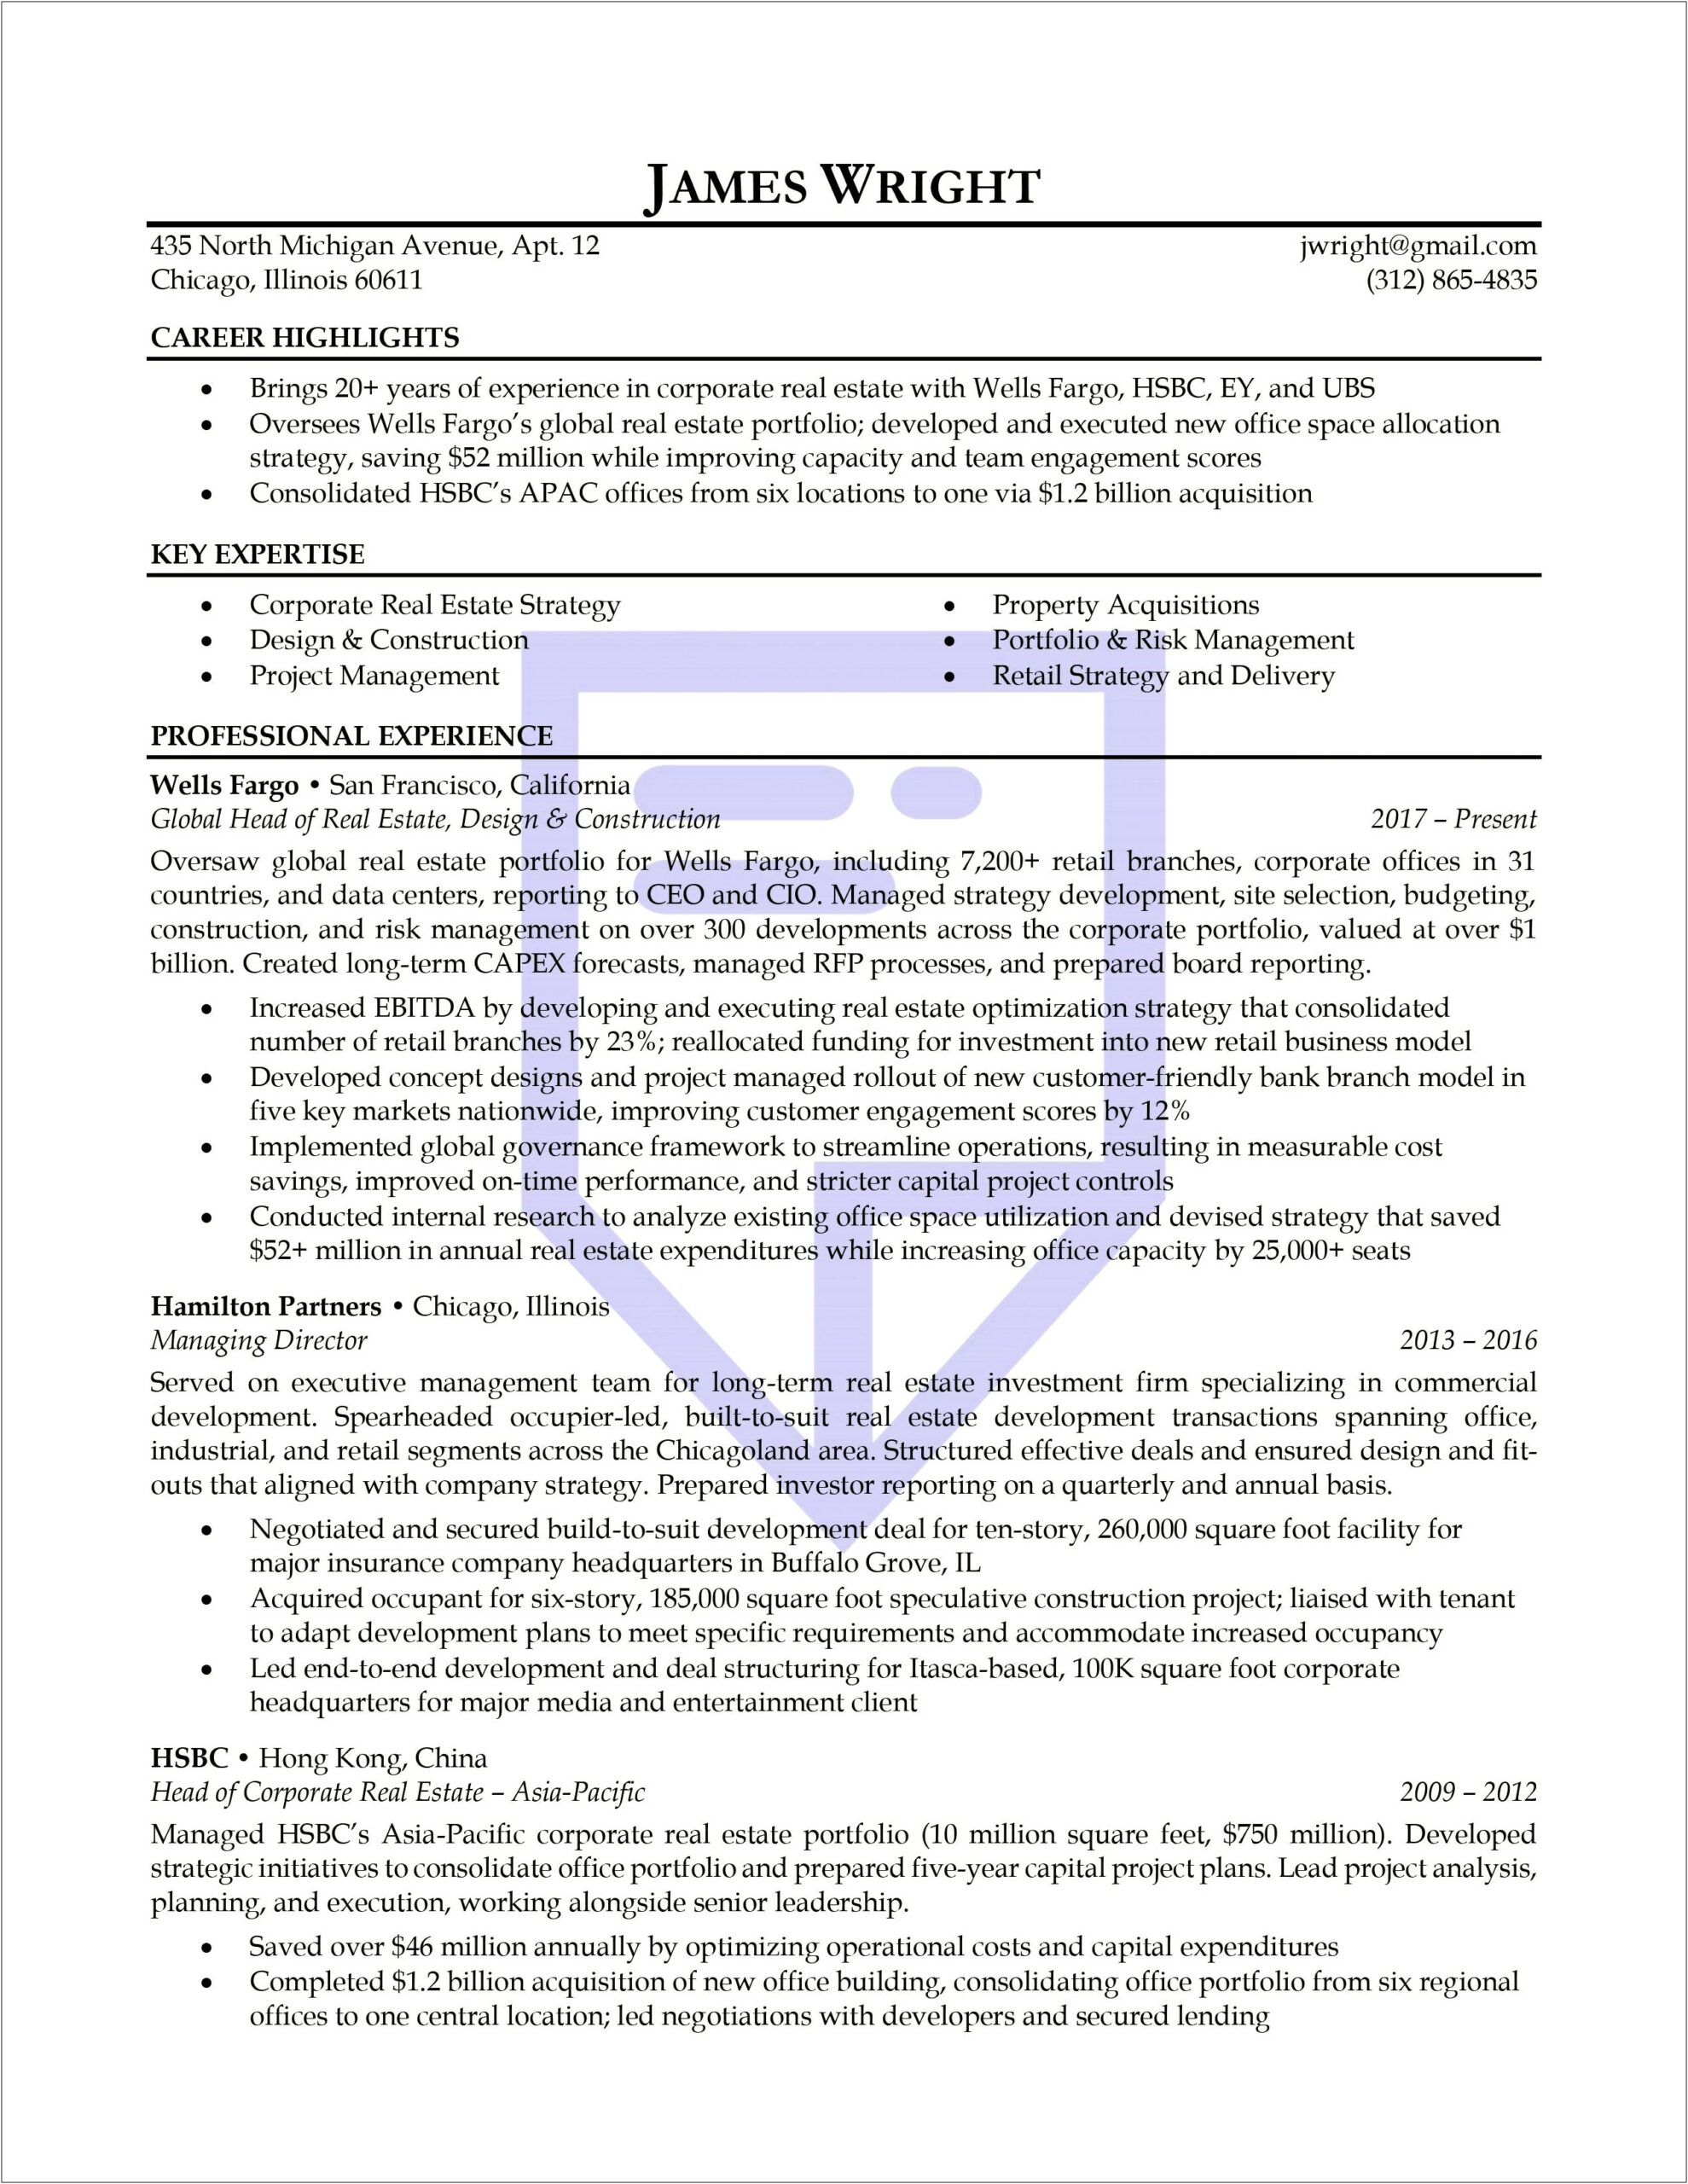 Executive Summary For Real Estate Resume